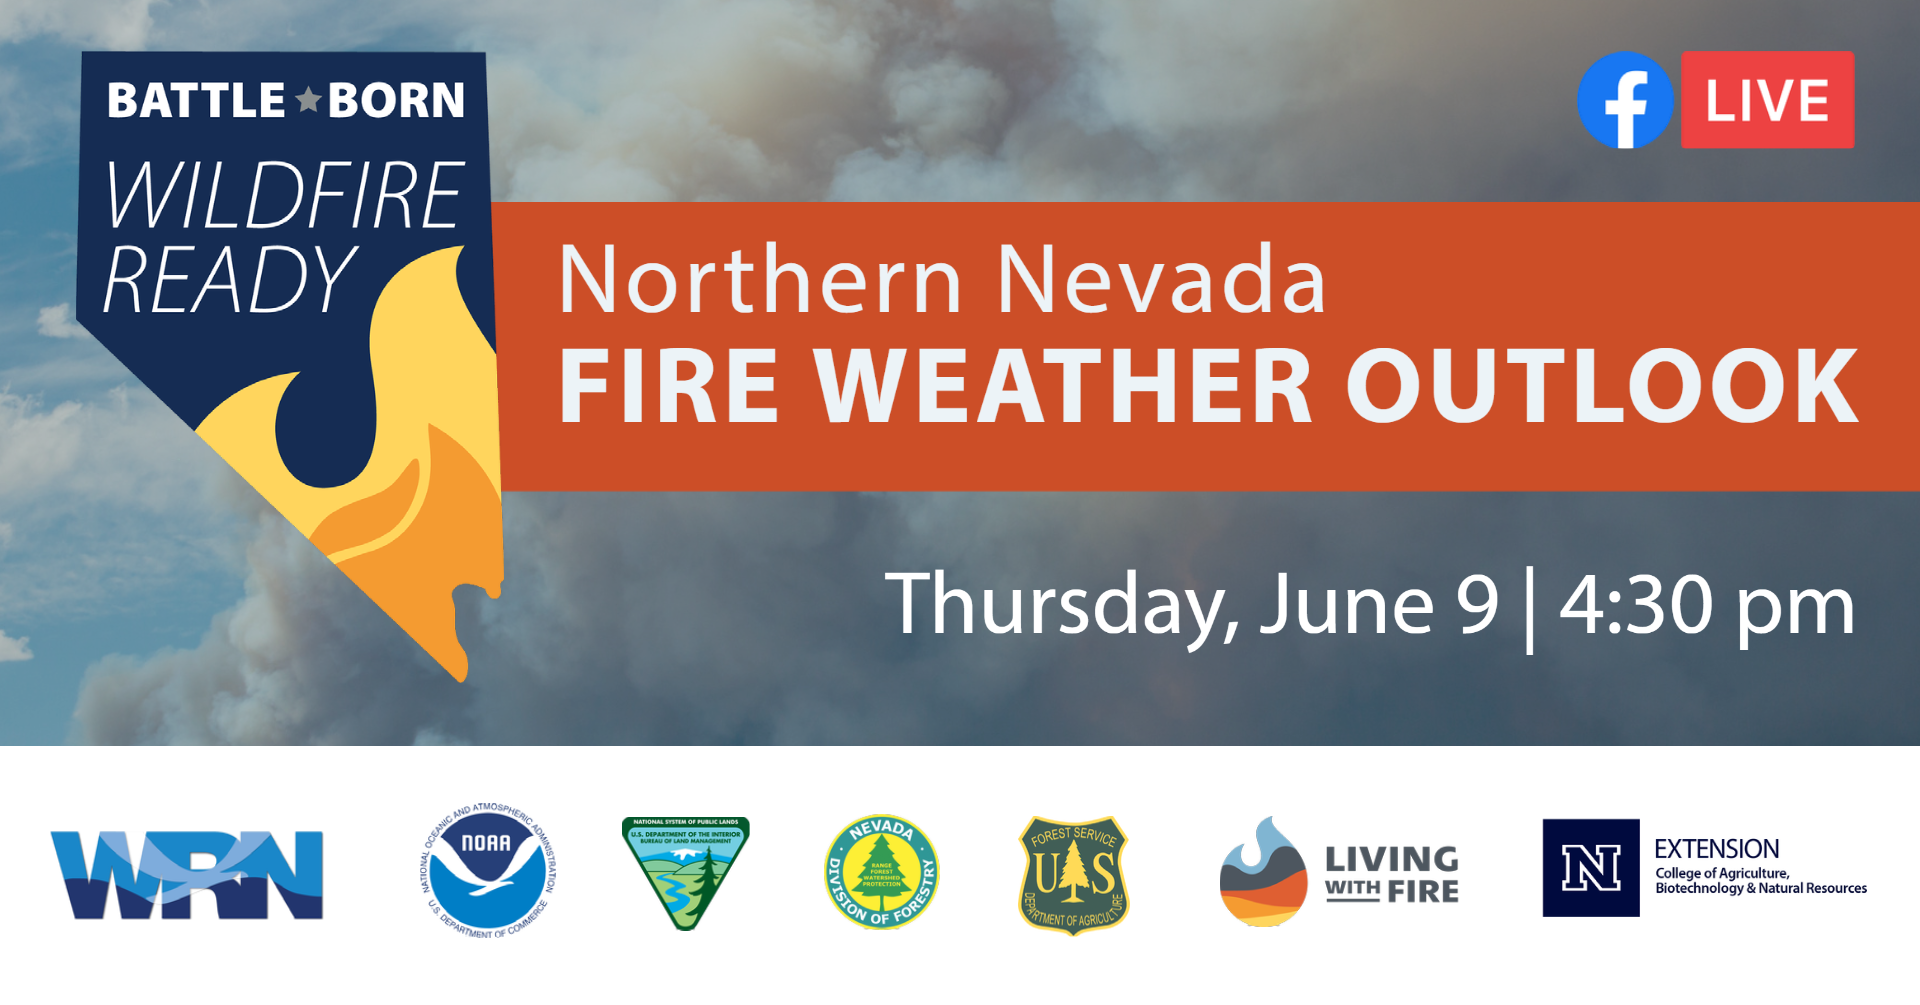 In the background is a dark plume of smoke and in the foreground on the left is a Nevada-shaped icon with text on the image that reads, “battle born wildfire ready.” On the right is text that reads "Northern Nevada Fire Weather outlook. Thursday, June 9 4:30 pm." Across the bottom are logos for weather ready nation, NOAA, Bureau of land management, nevada division of foresty, usda forest service, living with fire, and university of Nevada reno, extension.